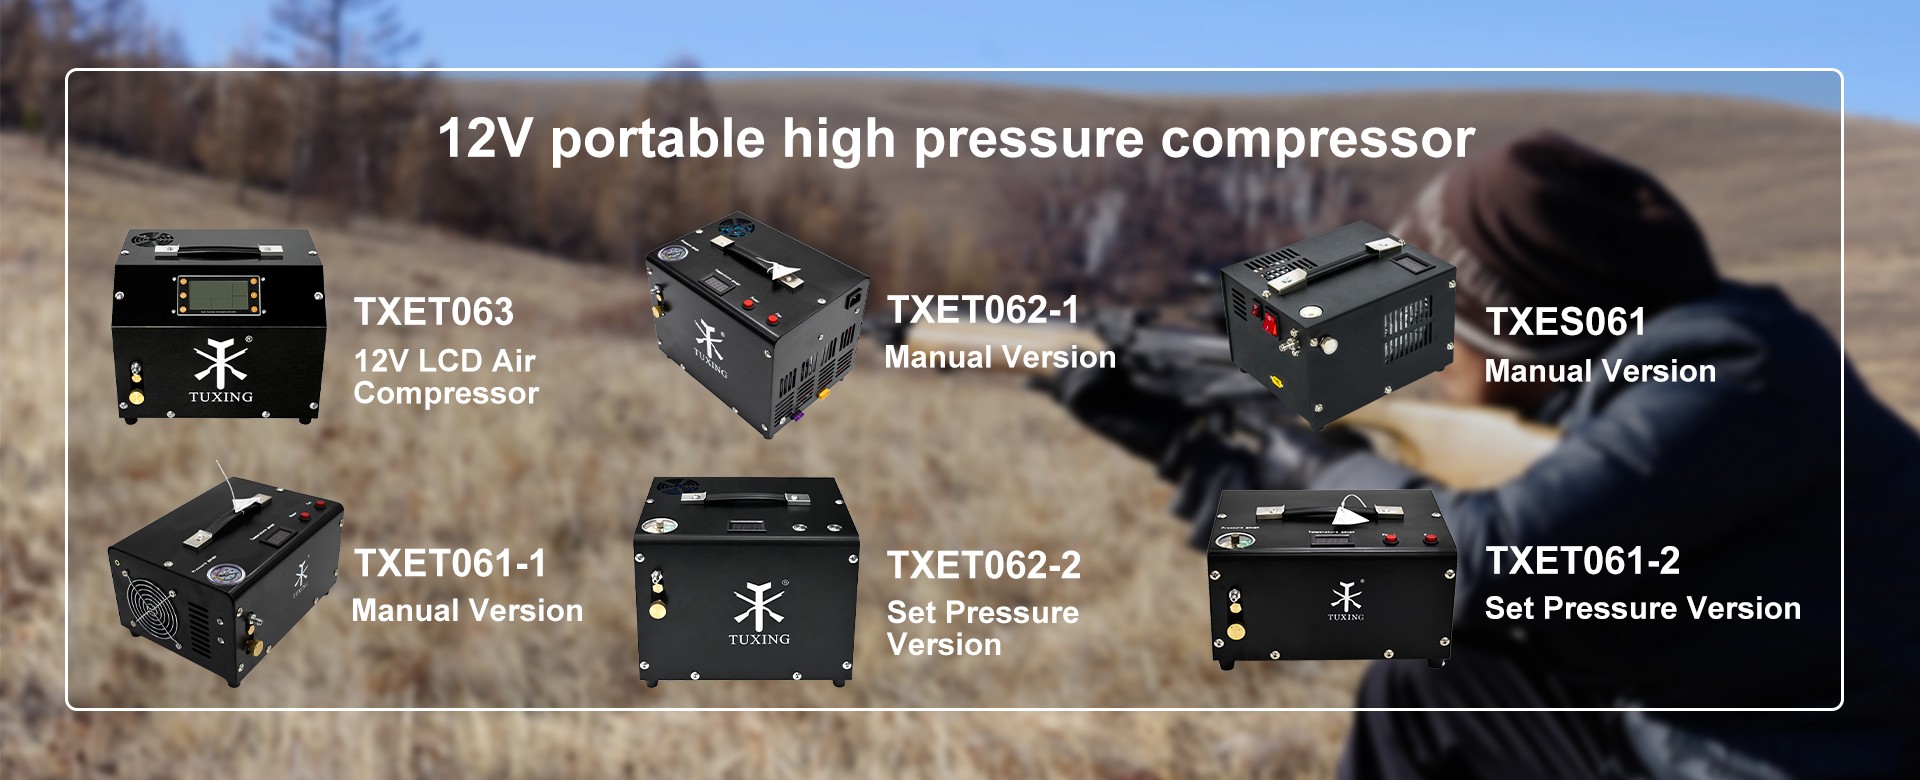 TUXING 12V/220V COMPRESSOR AUTO-STOP - TXET061-2, Fill your PCP and  Paintball without any worries 